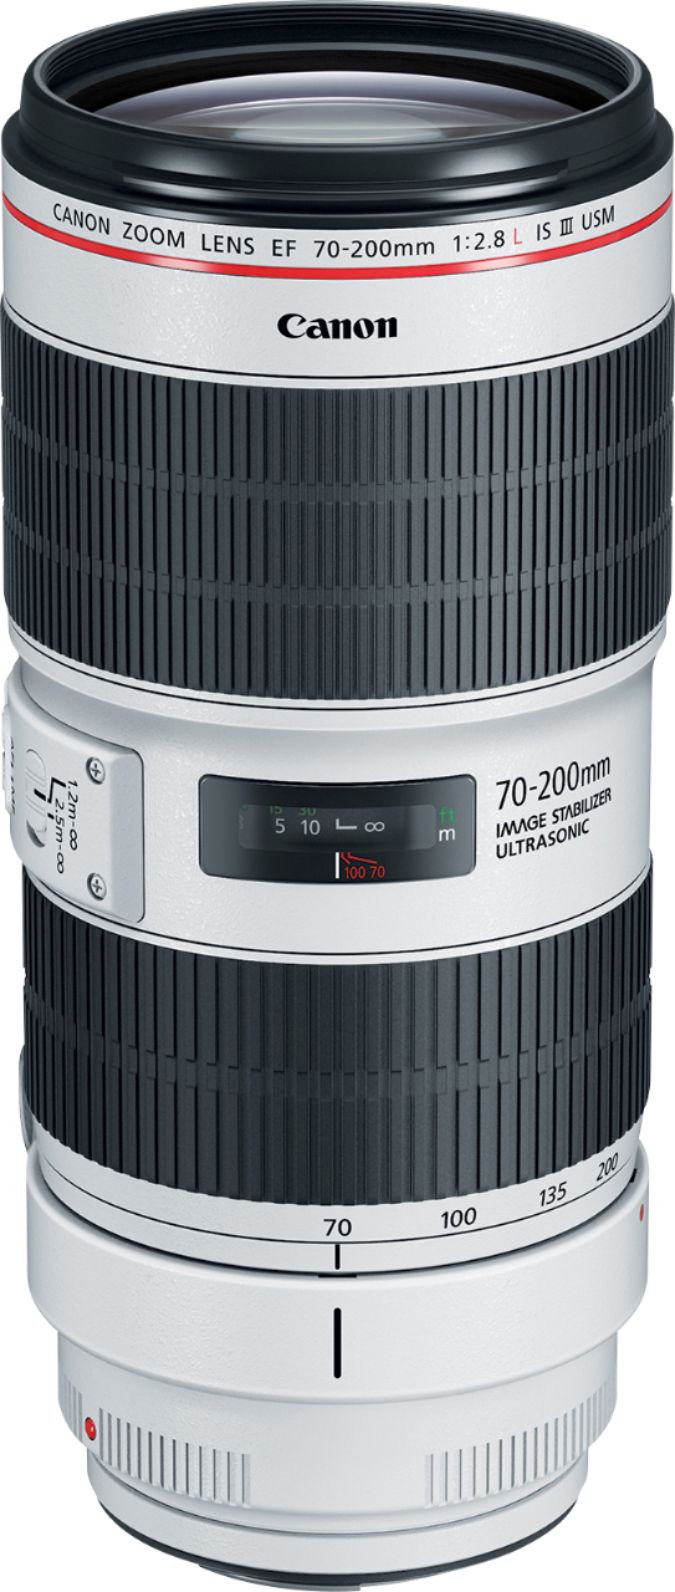 Canon EF 70-200mm f/2.8L IS III USM Optical Telephoto Zoom Lens for